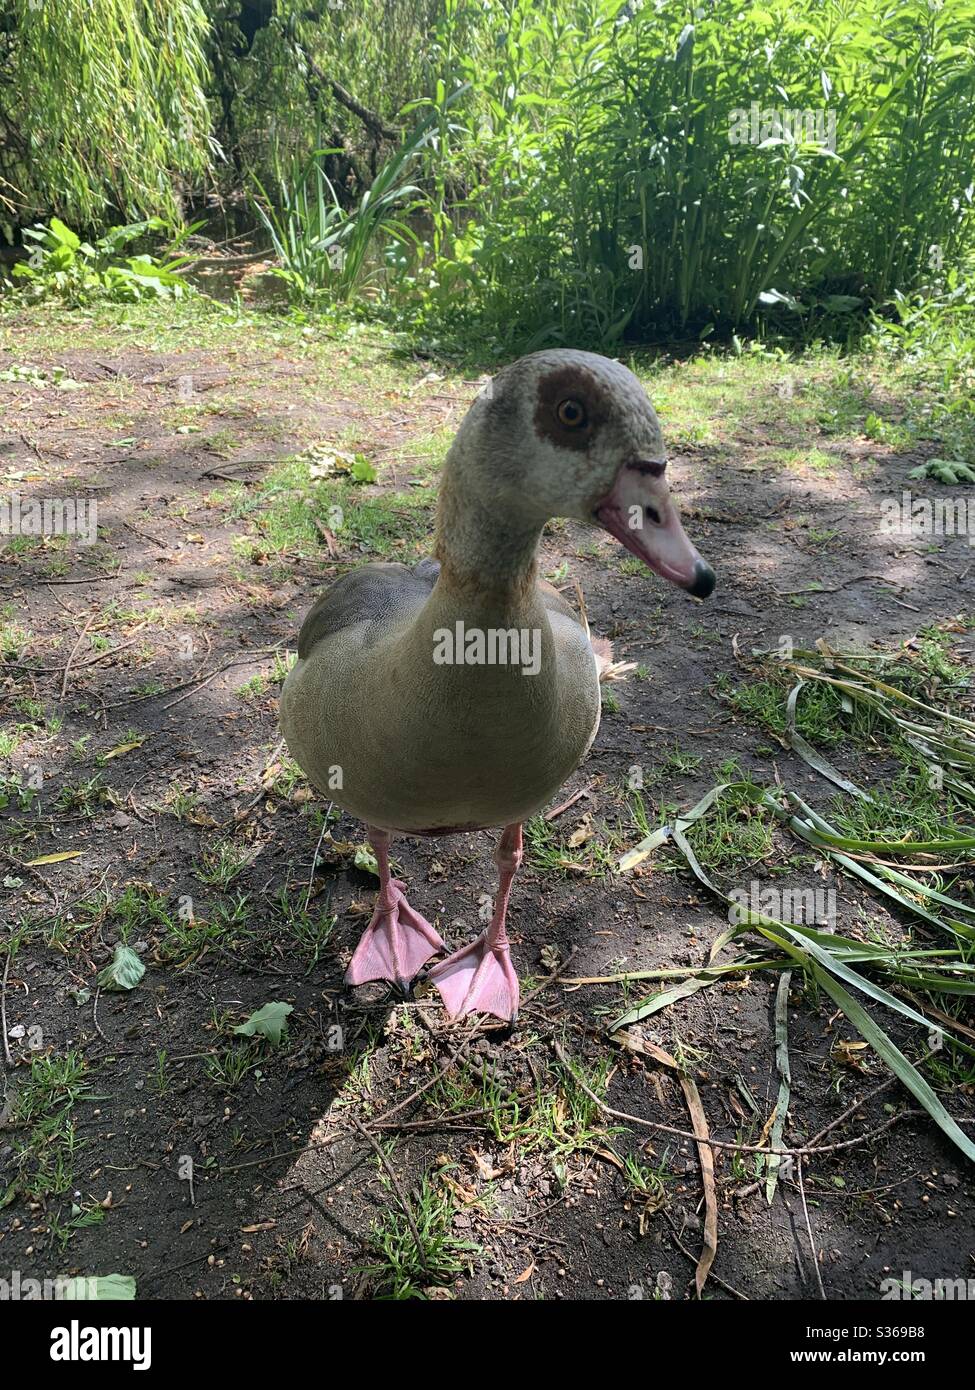 An Egyptian Goose in Amsterdam’s Vondelpark makes eye contact, up close and personal! Stock Photo